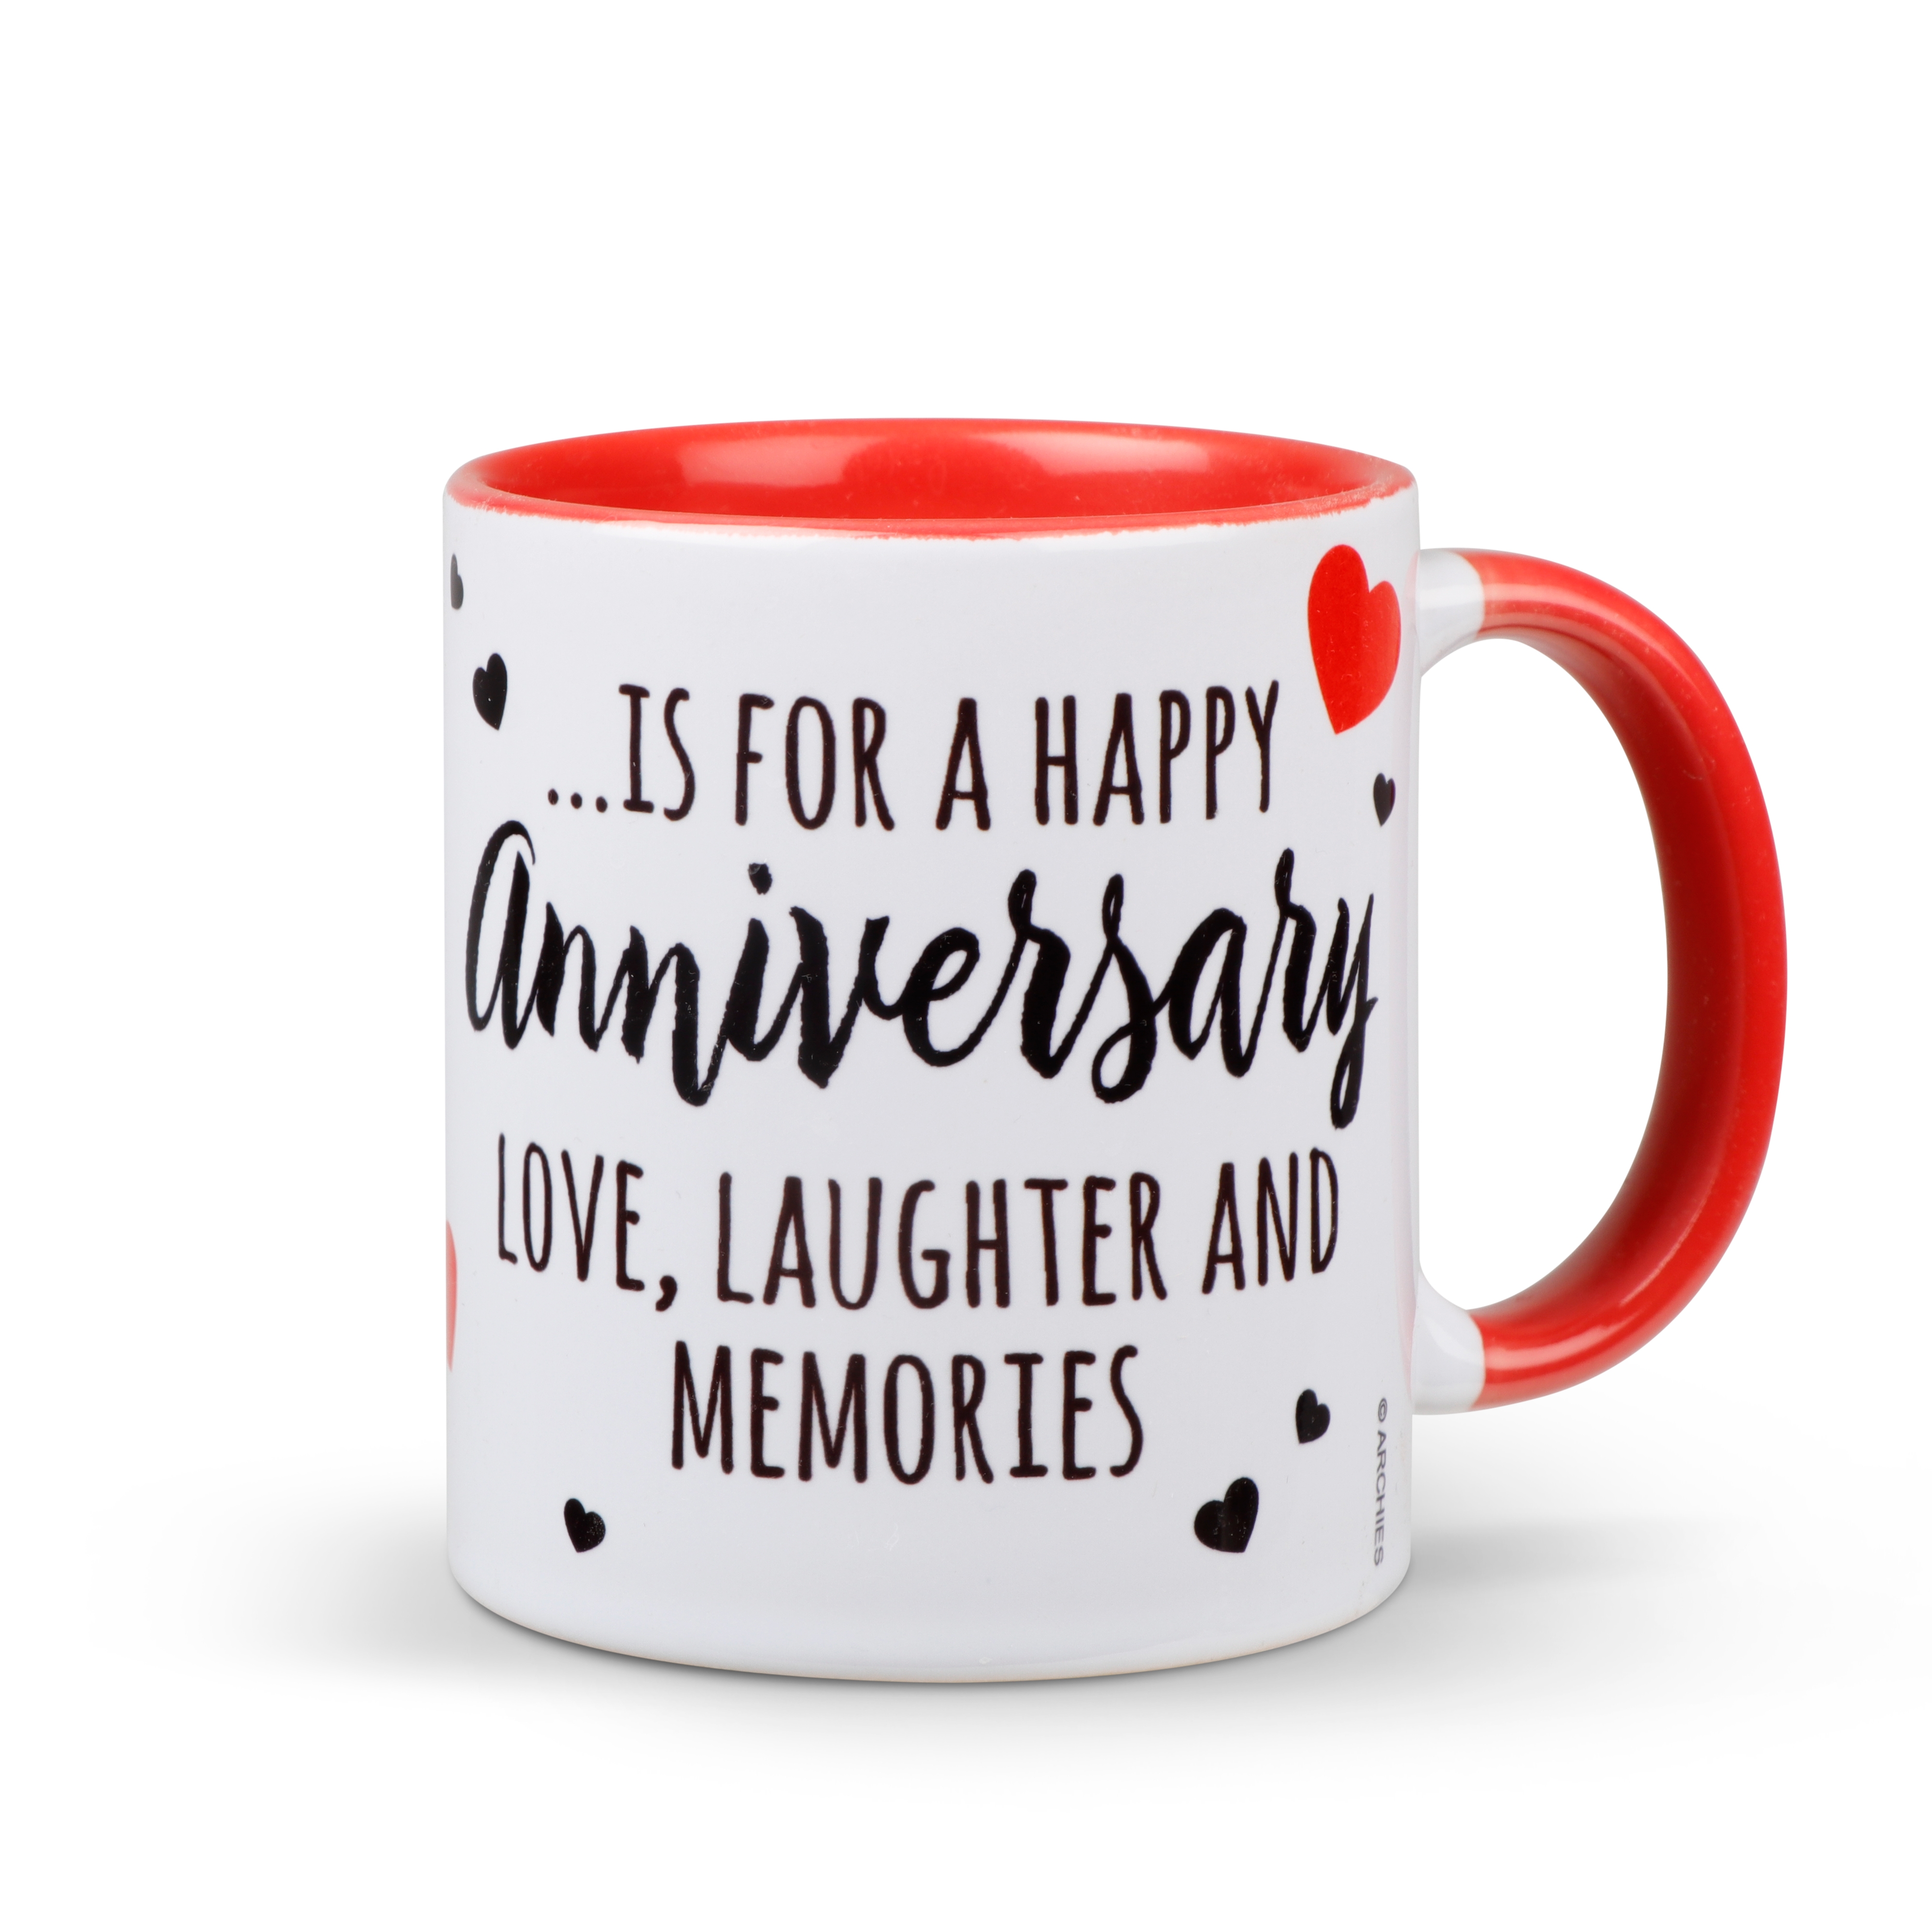 Archies | Archies KEEPSAKE MUG - A-IS FOR MY ANNIVERSIRY LOVE LAUGHTER AND MEMORIES Mug Coffee Cup White Printed Ceramic Gift  (12 x 11 x 9) (350 ml) 1